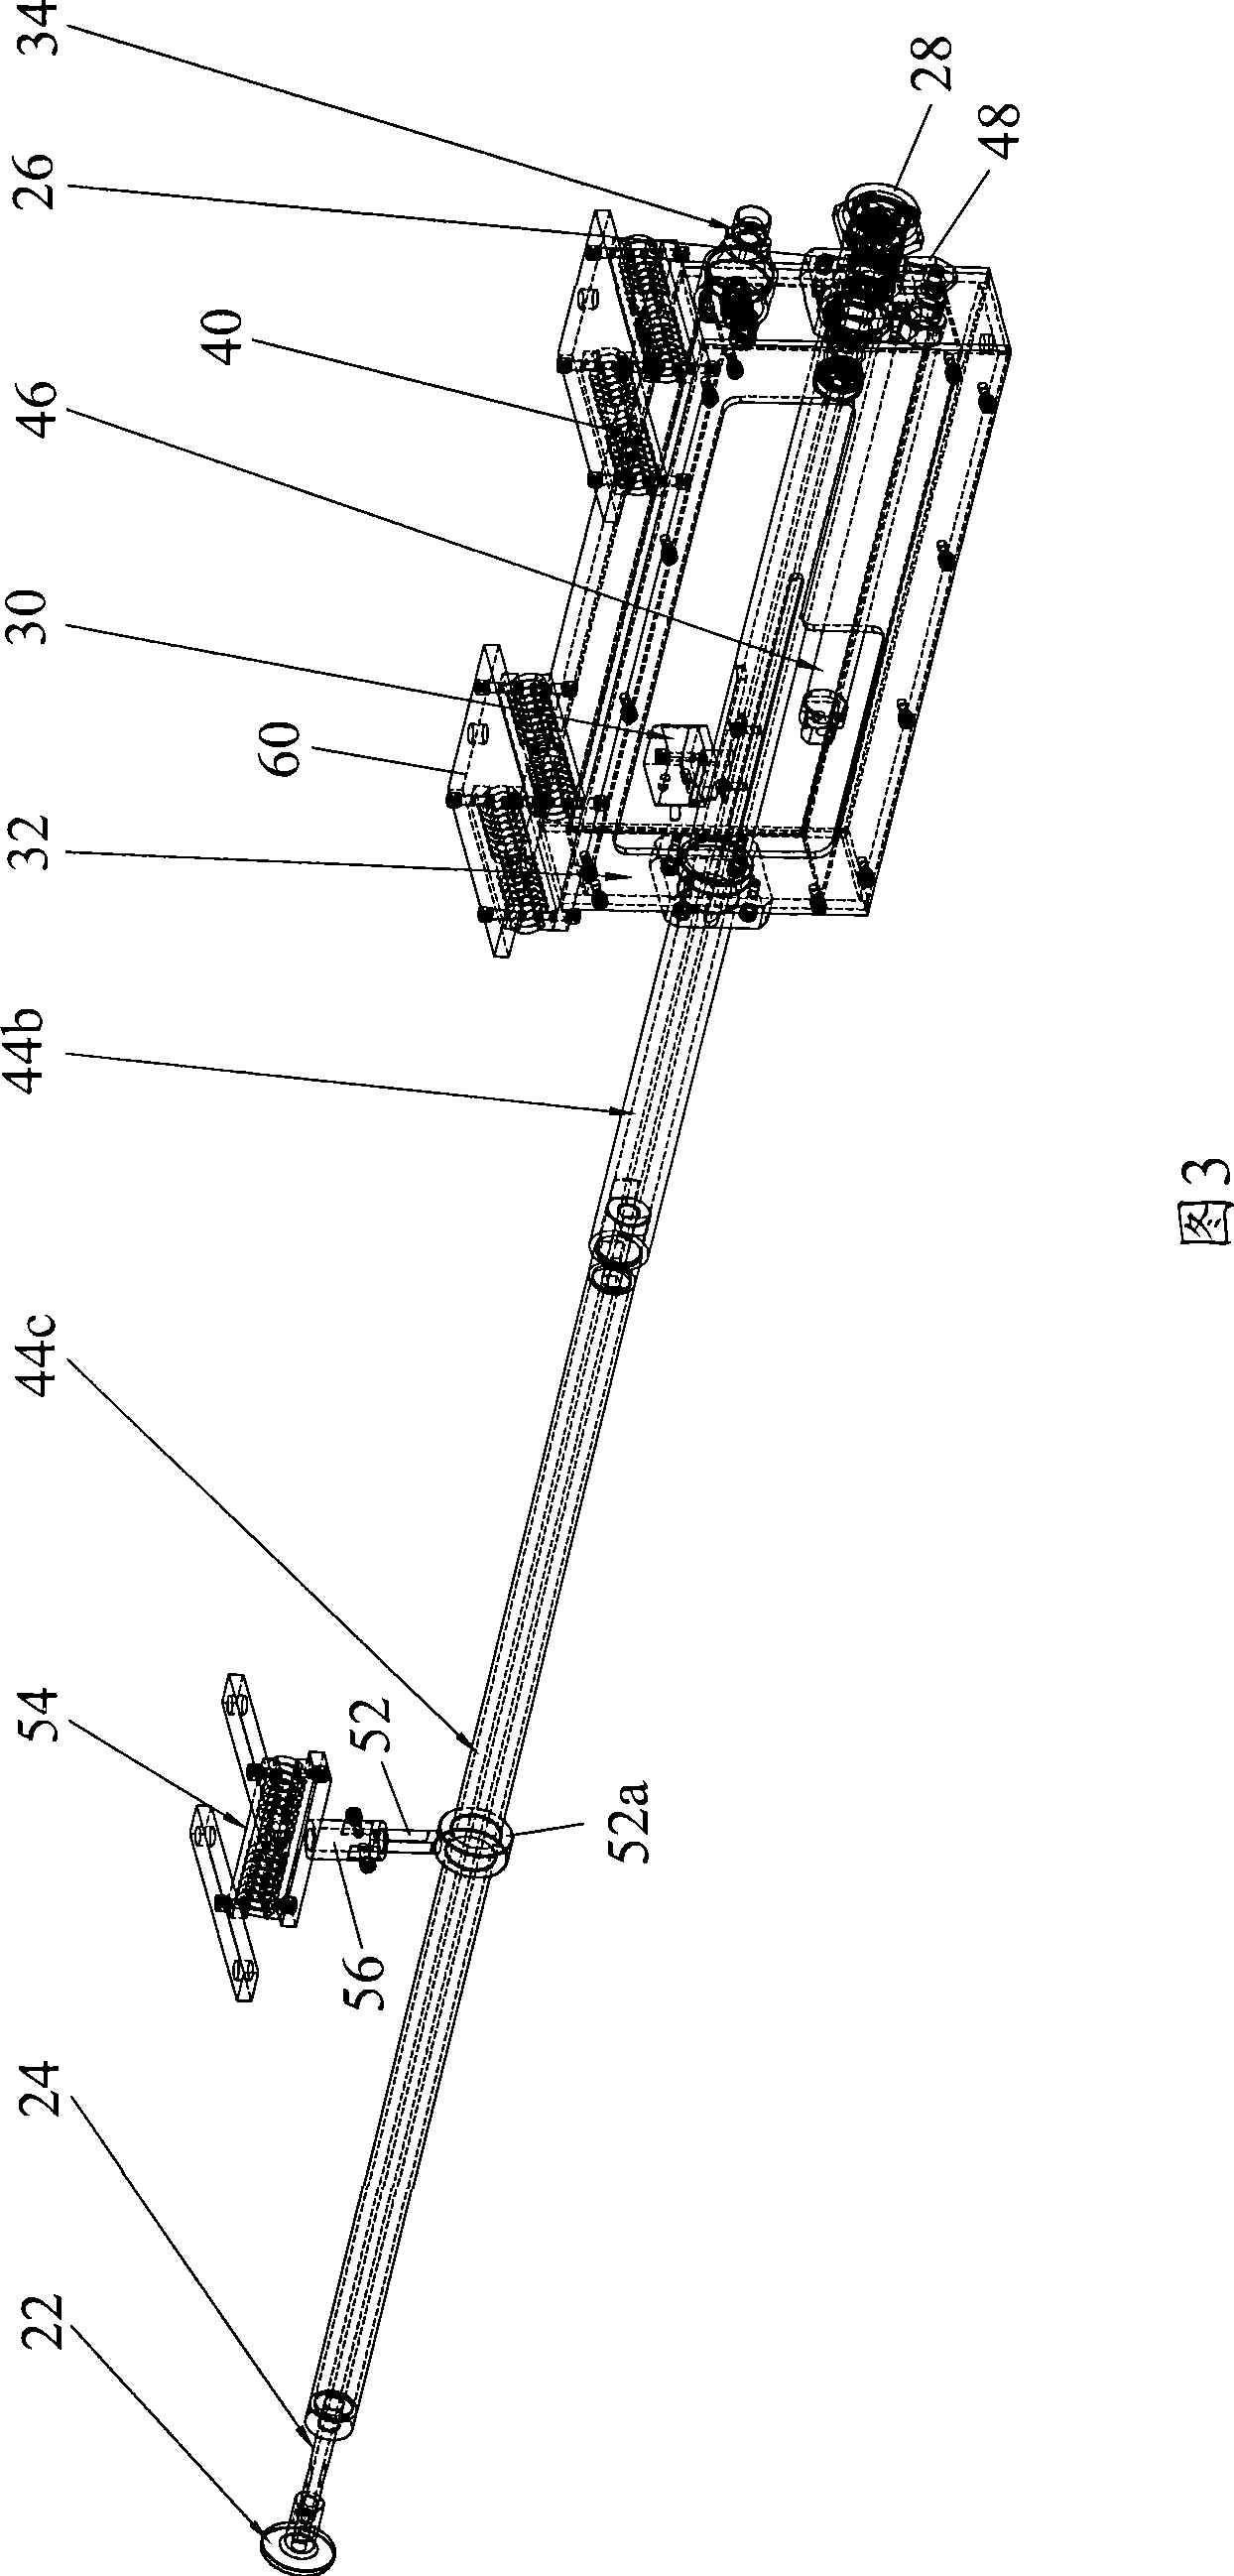 Detecting device of discharging slag from ladle